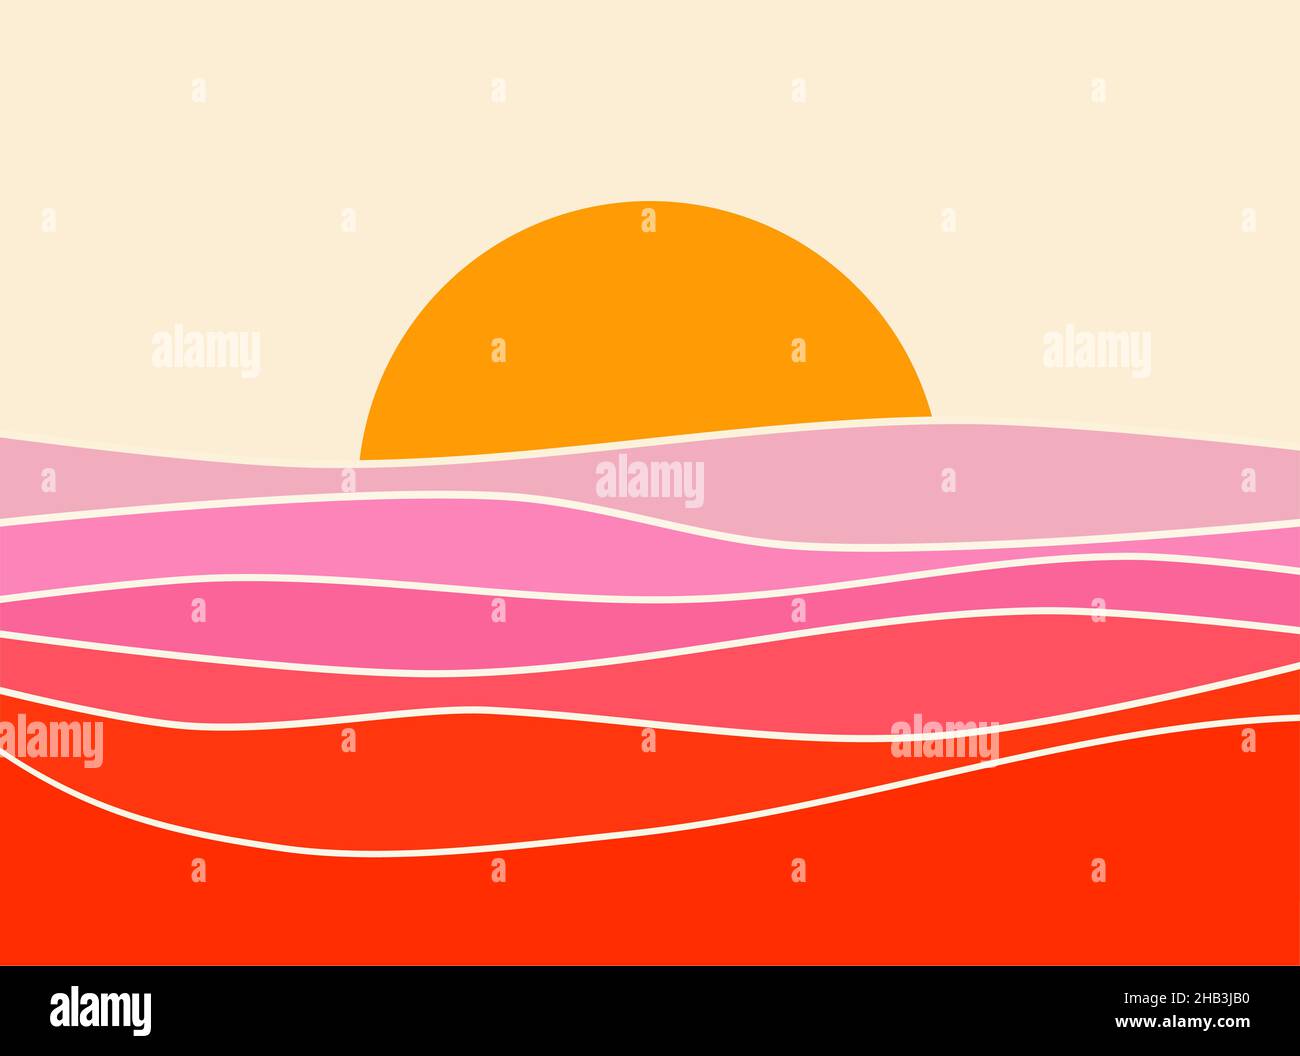 Retro abstract sunset landscape 70's style mid century modern graphic design, pink and red vintage illustration, colorful minimal Art Deco gradient st Stock Photo